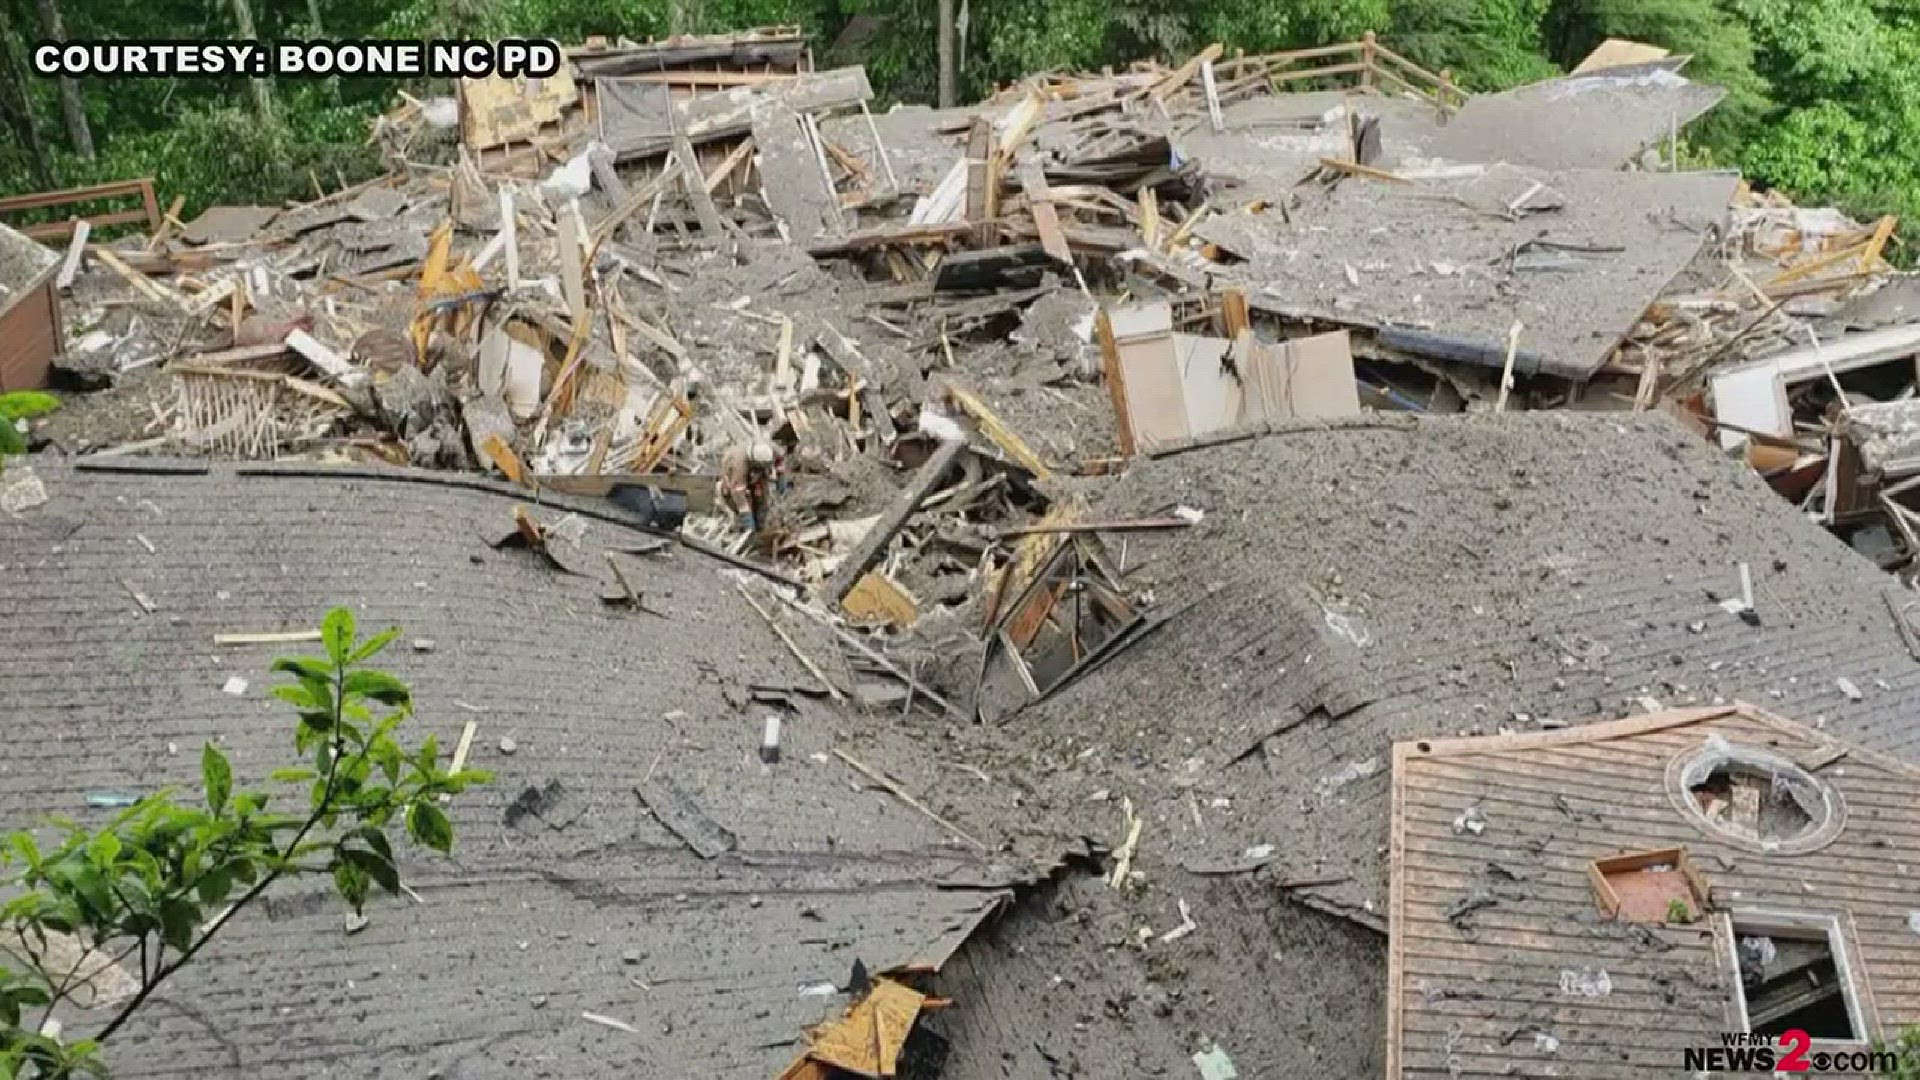 Two people have died in a mudslide in Watauga County NC